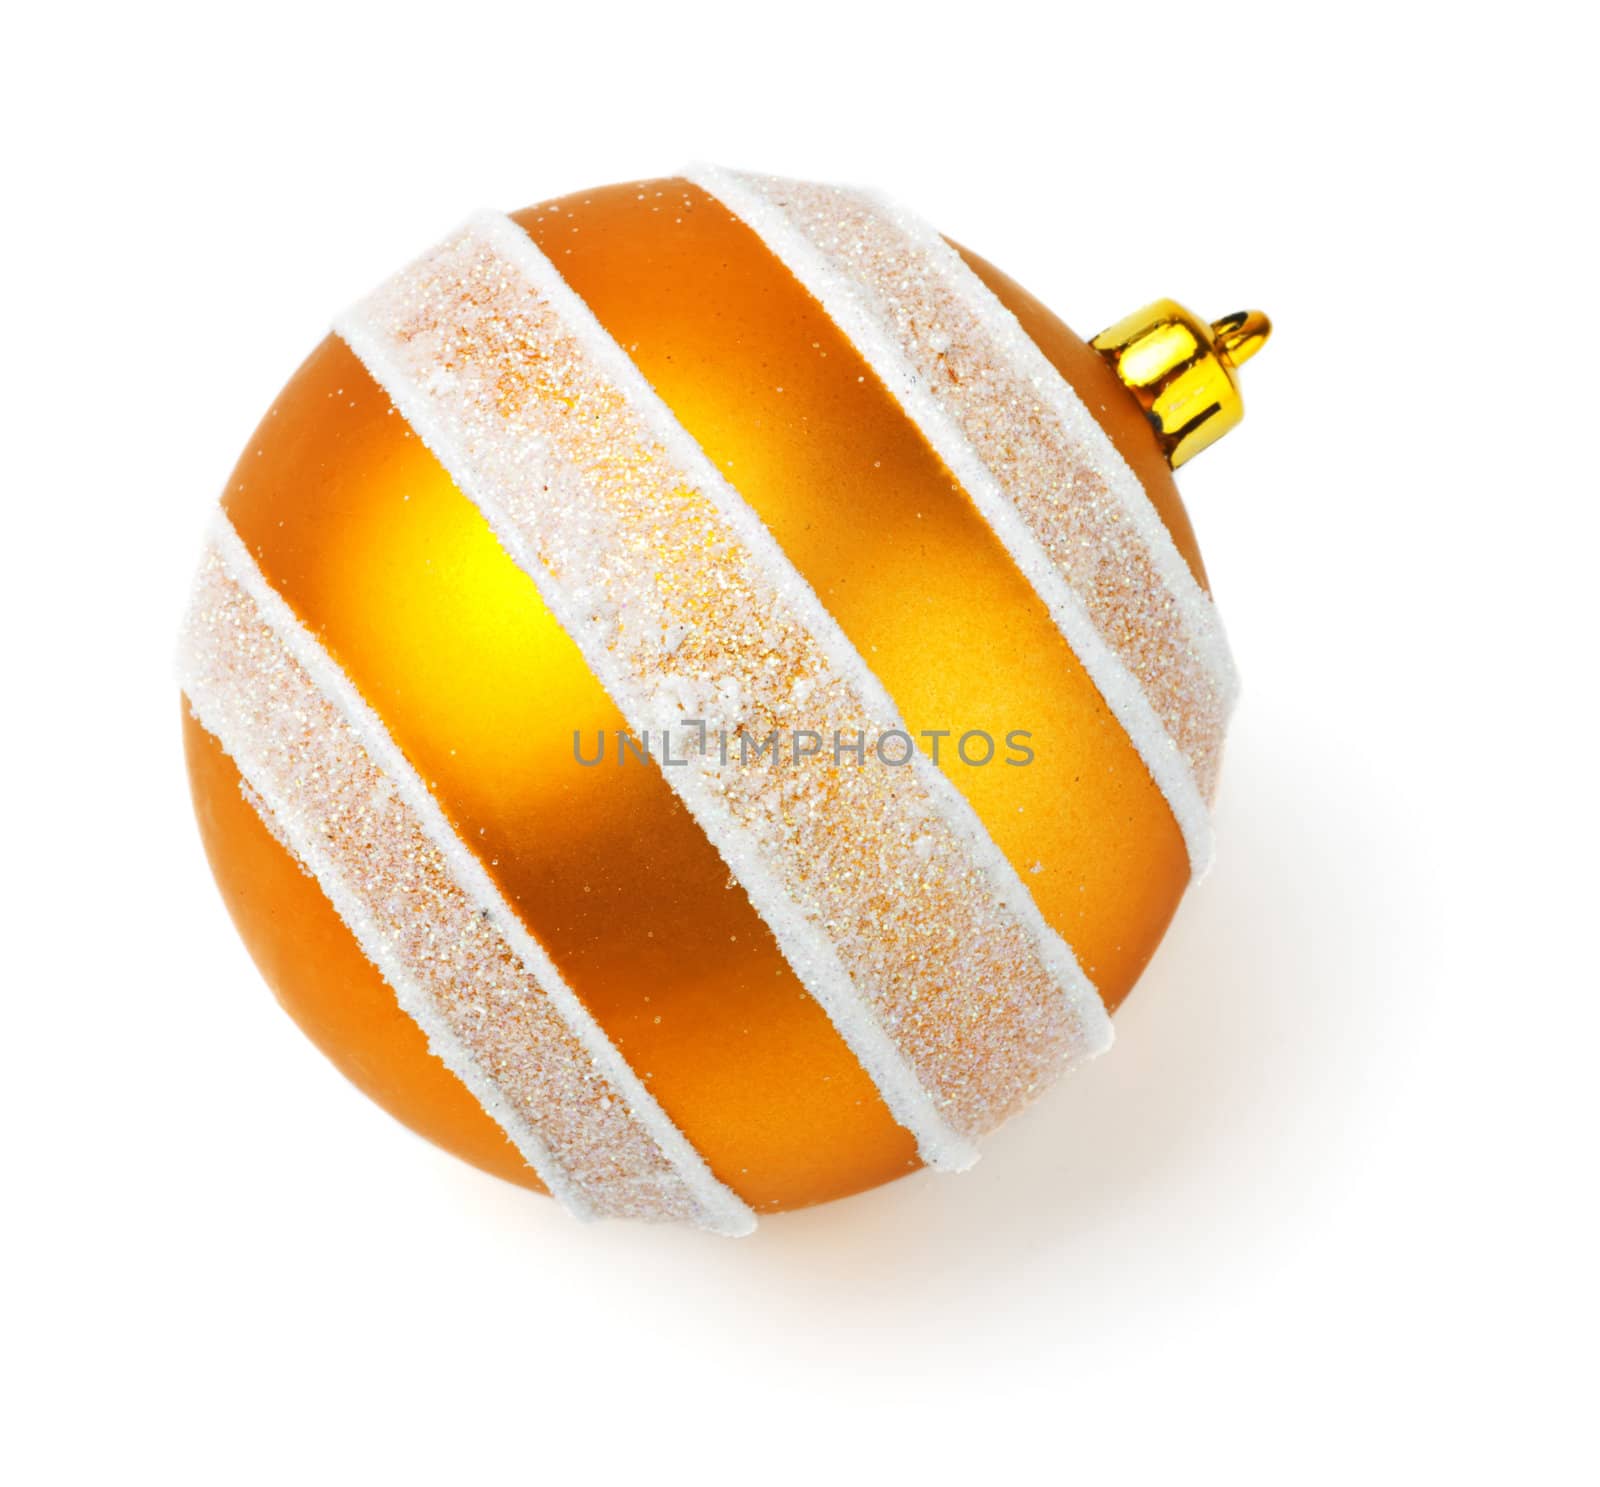 yellow decoration ball isolated on white